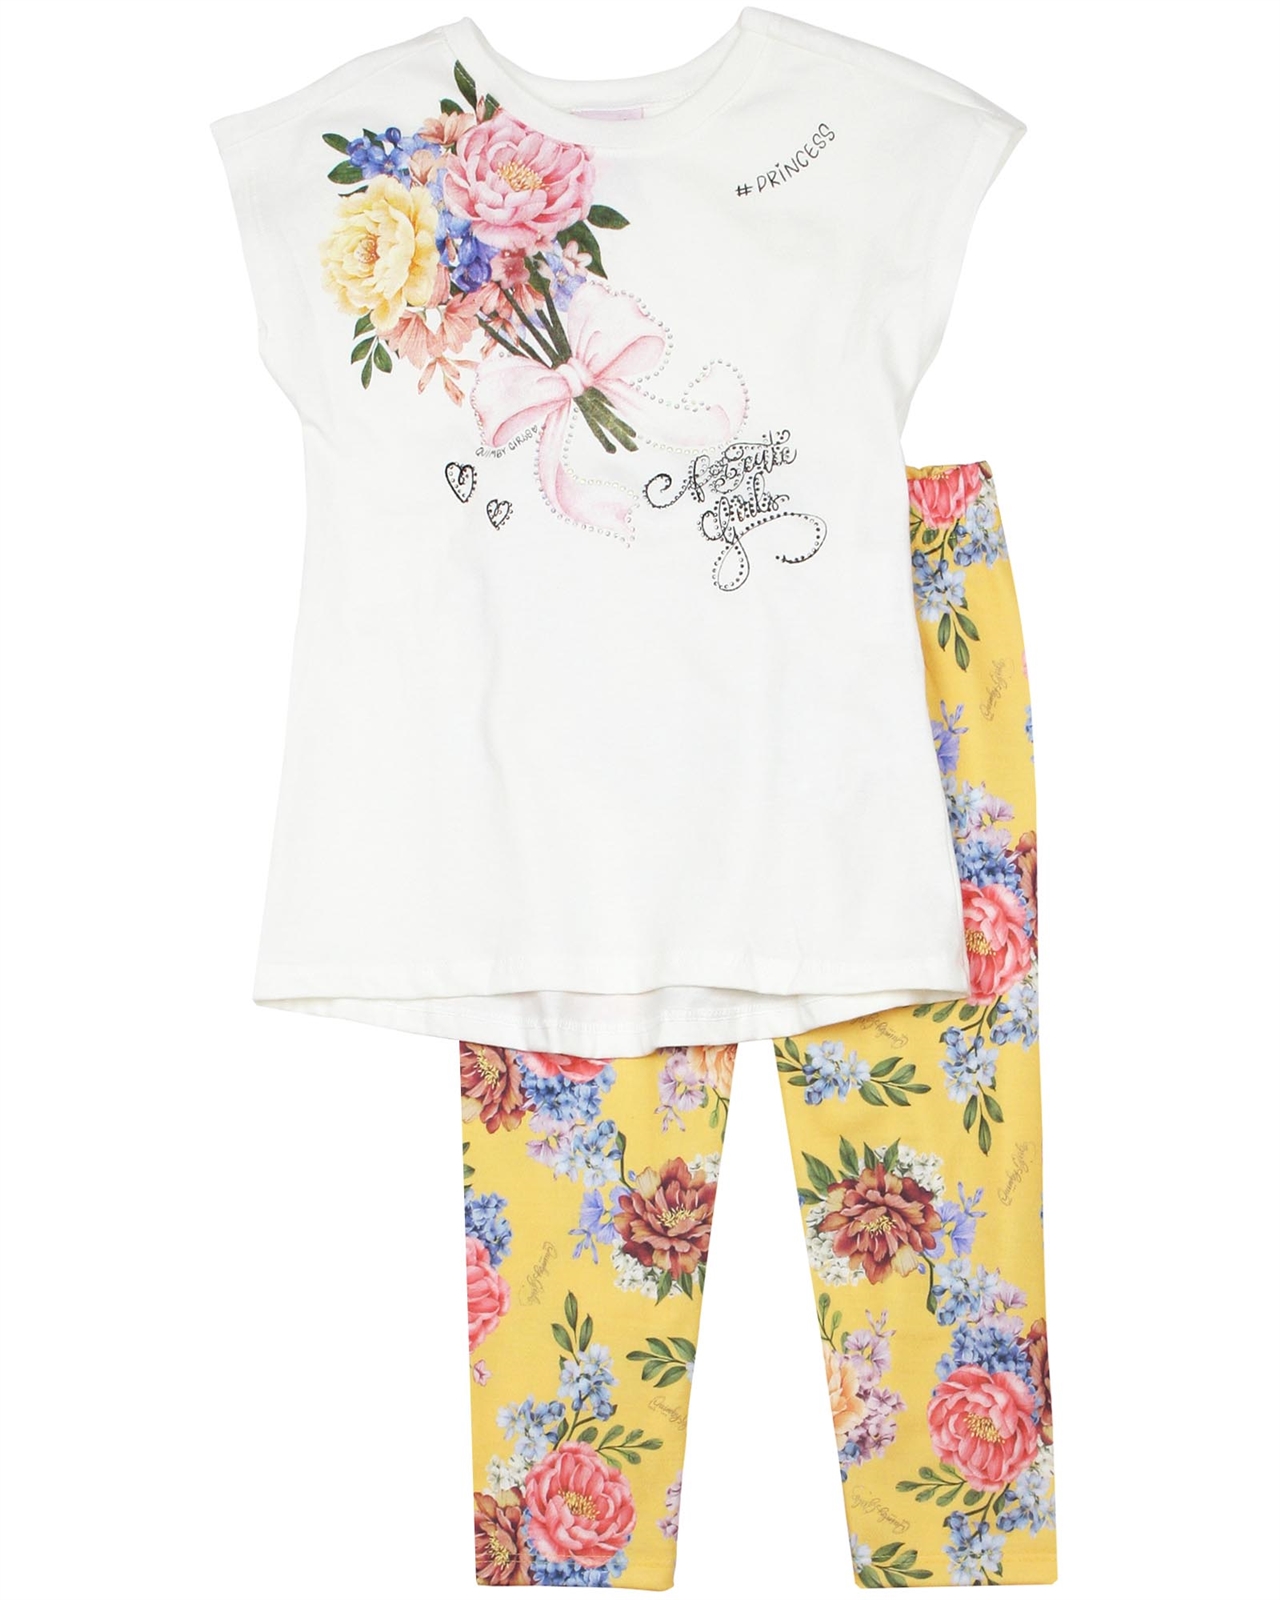 Quimby Girls Top and Floral Print Leggings Set in Ivory/Yellow - Quimby ...